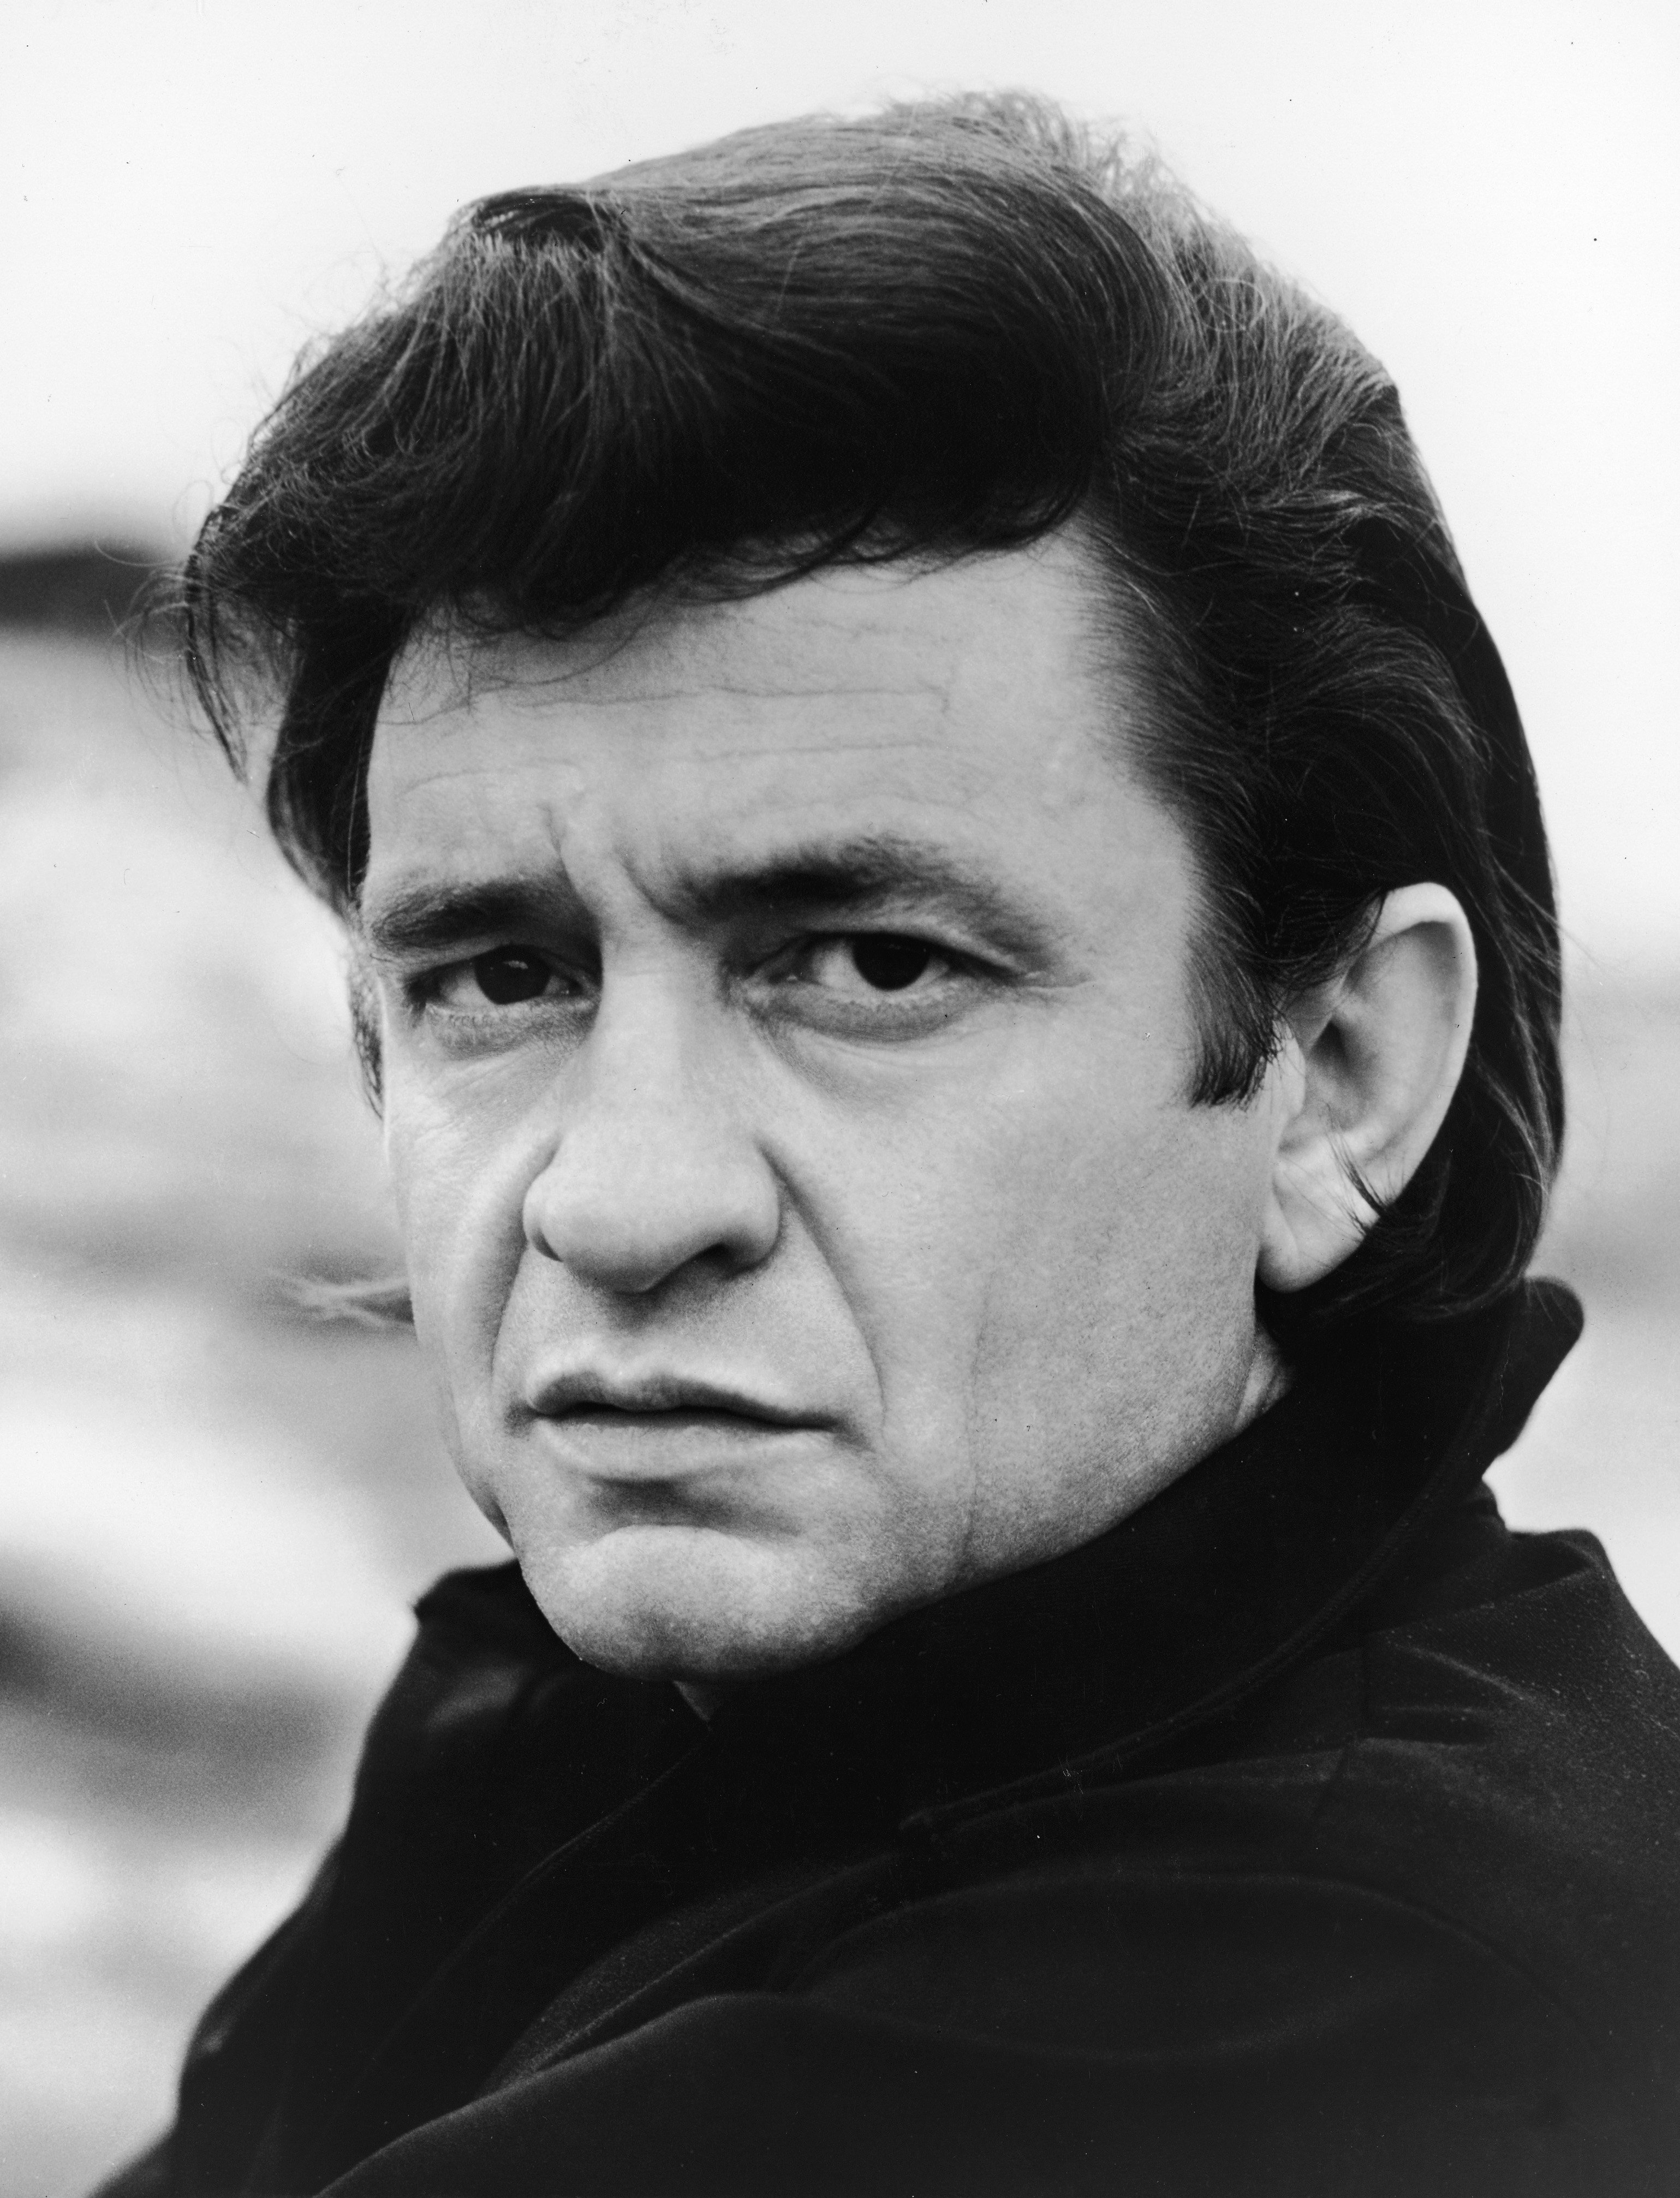 A headshot portrait of the late Johnny Cash | Photo: Getty Images